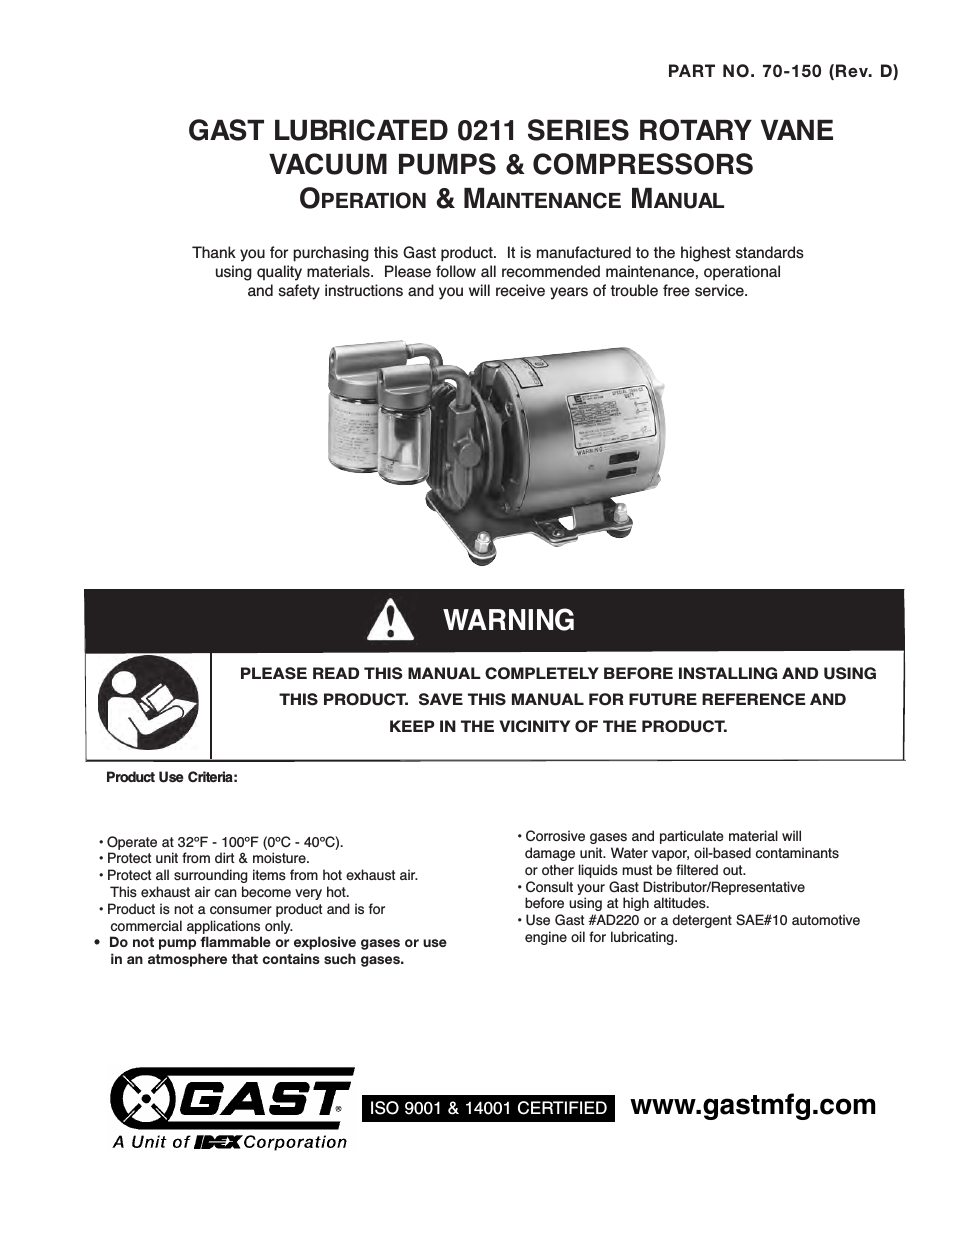 0211 Series Lubricated Vacuum Pumps and Compressors